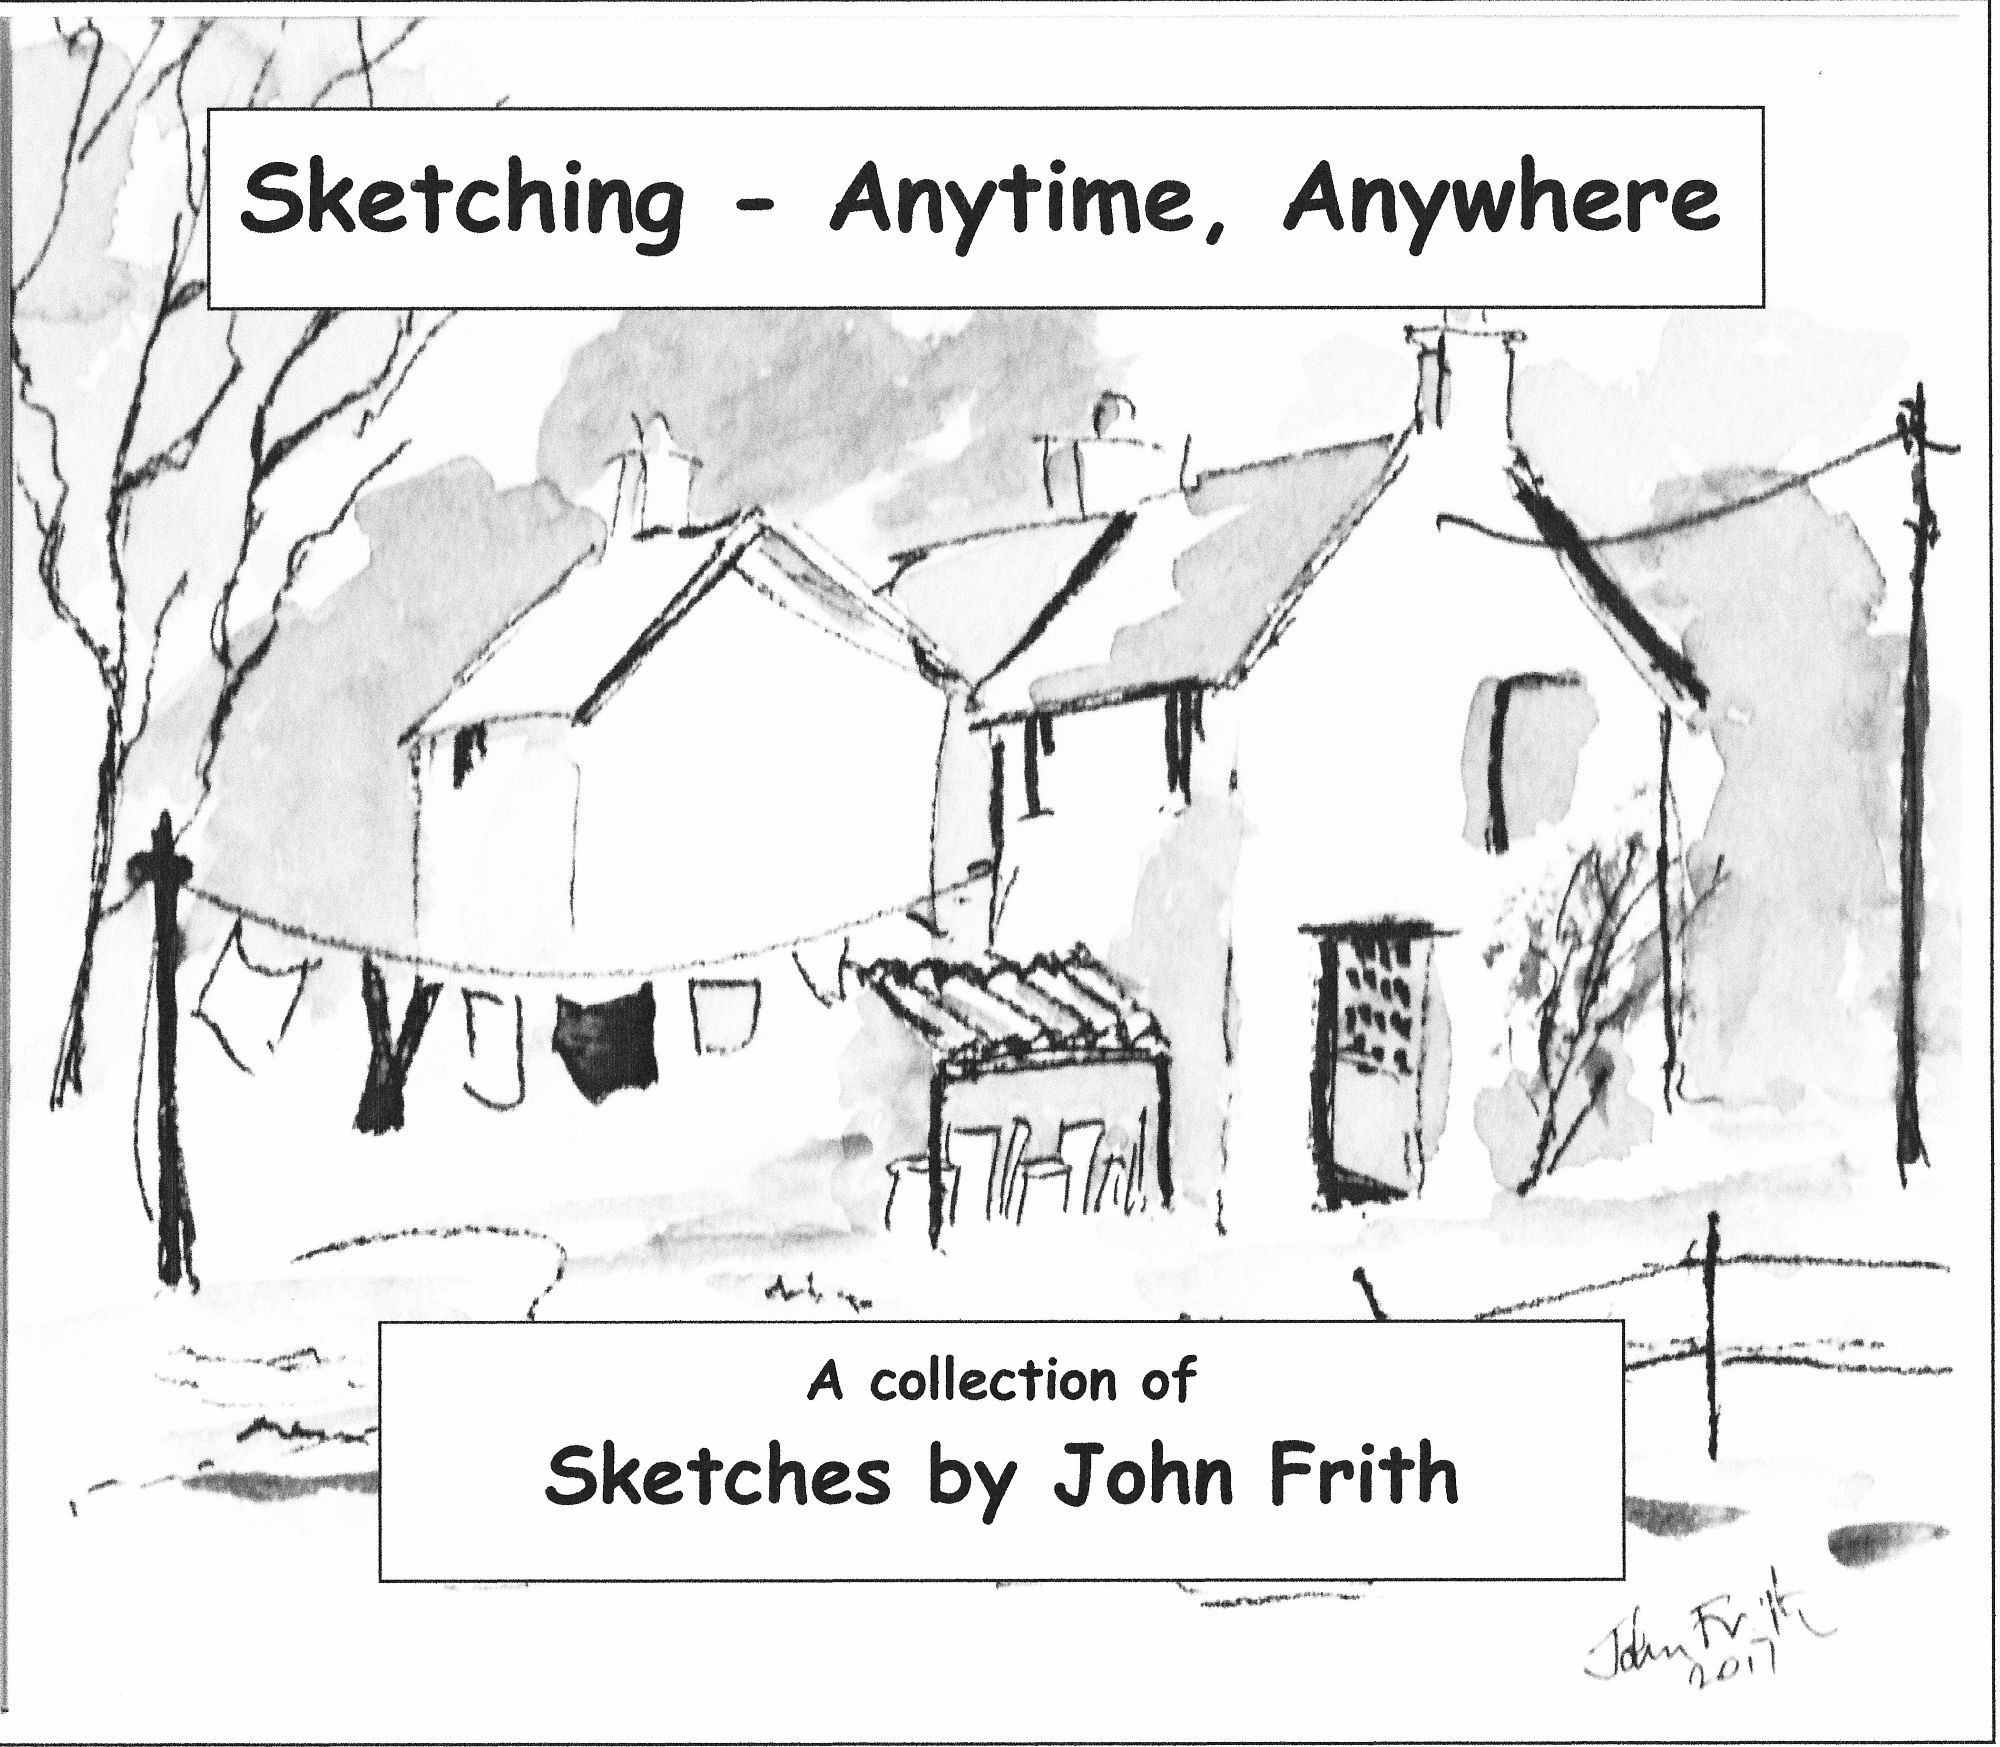 Sketching - Anytime, Anywhere